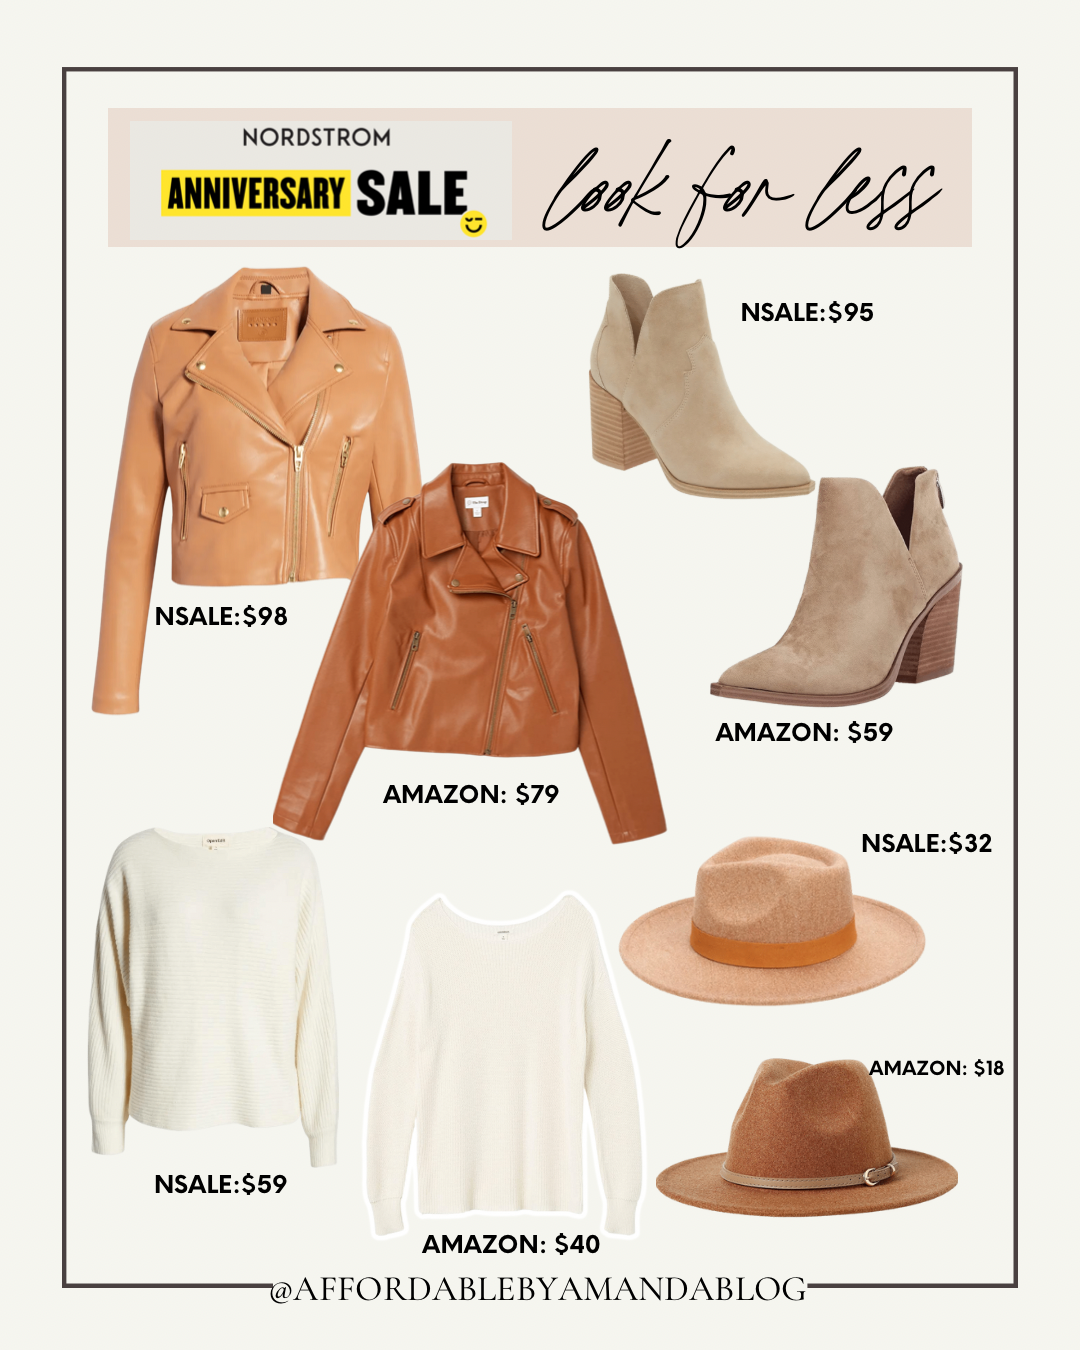  Nordstrom Anniversary Sale 2022 Fall Fashion Finds - Nordstrom Anniversary Sale Picks Get the Look for Less on Amazon